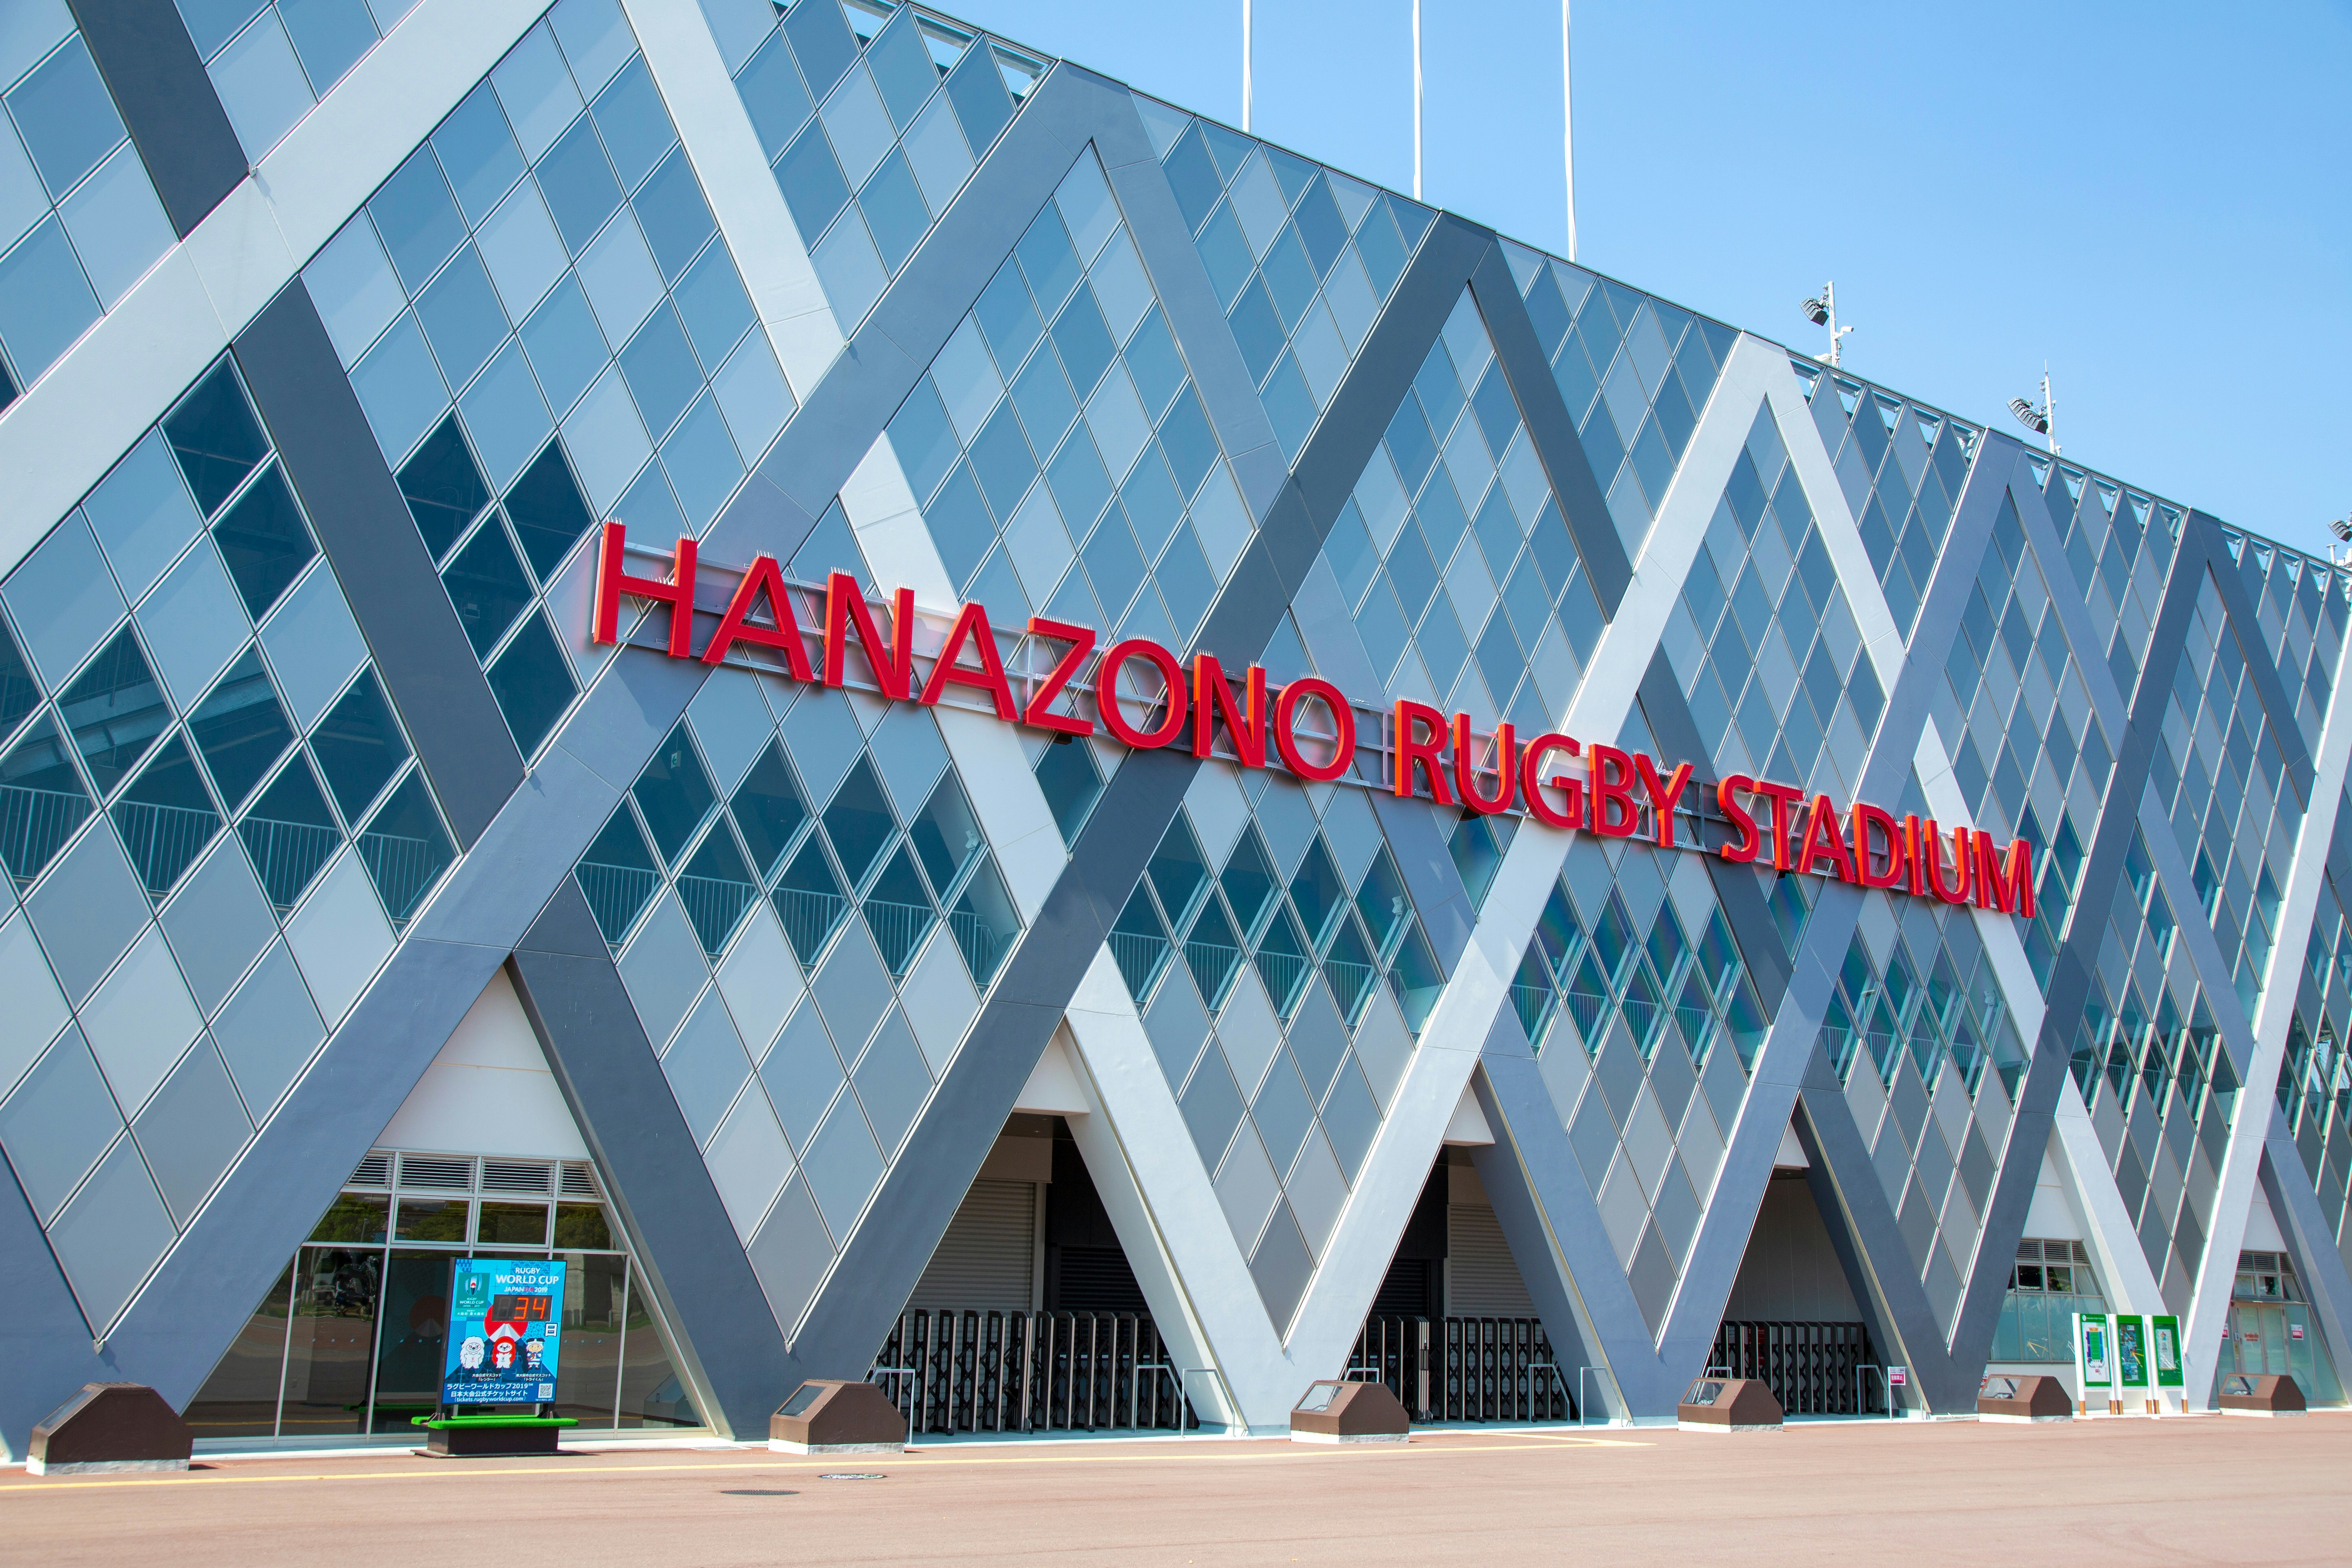 A large red sign that says "Hanazano Rugby Stadium" hangs on the side of the building. 